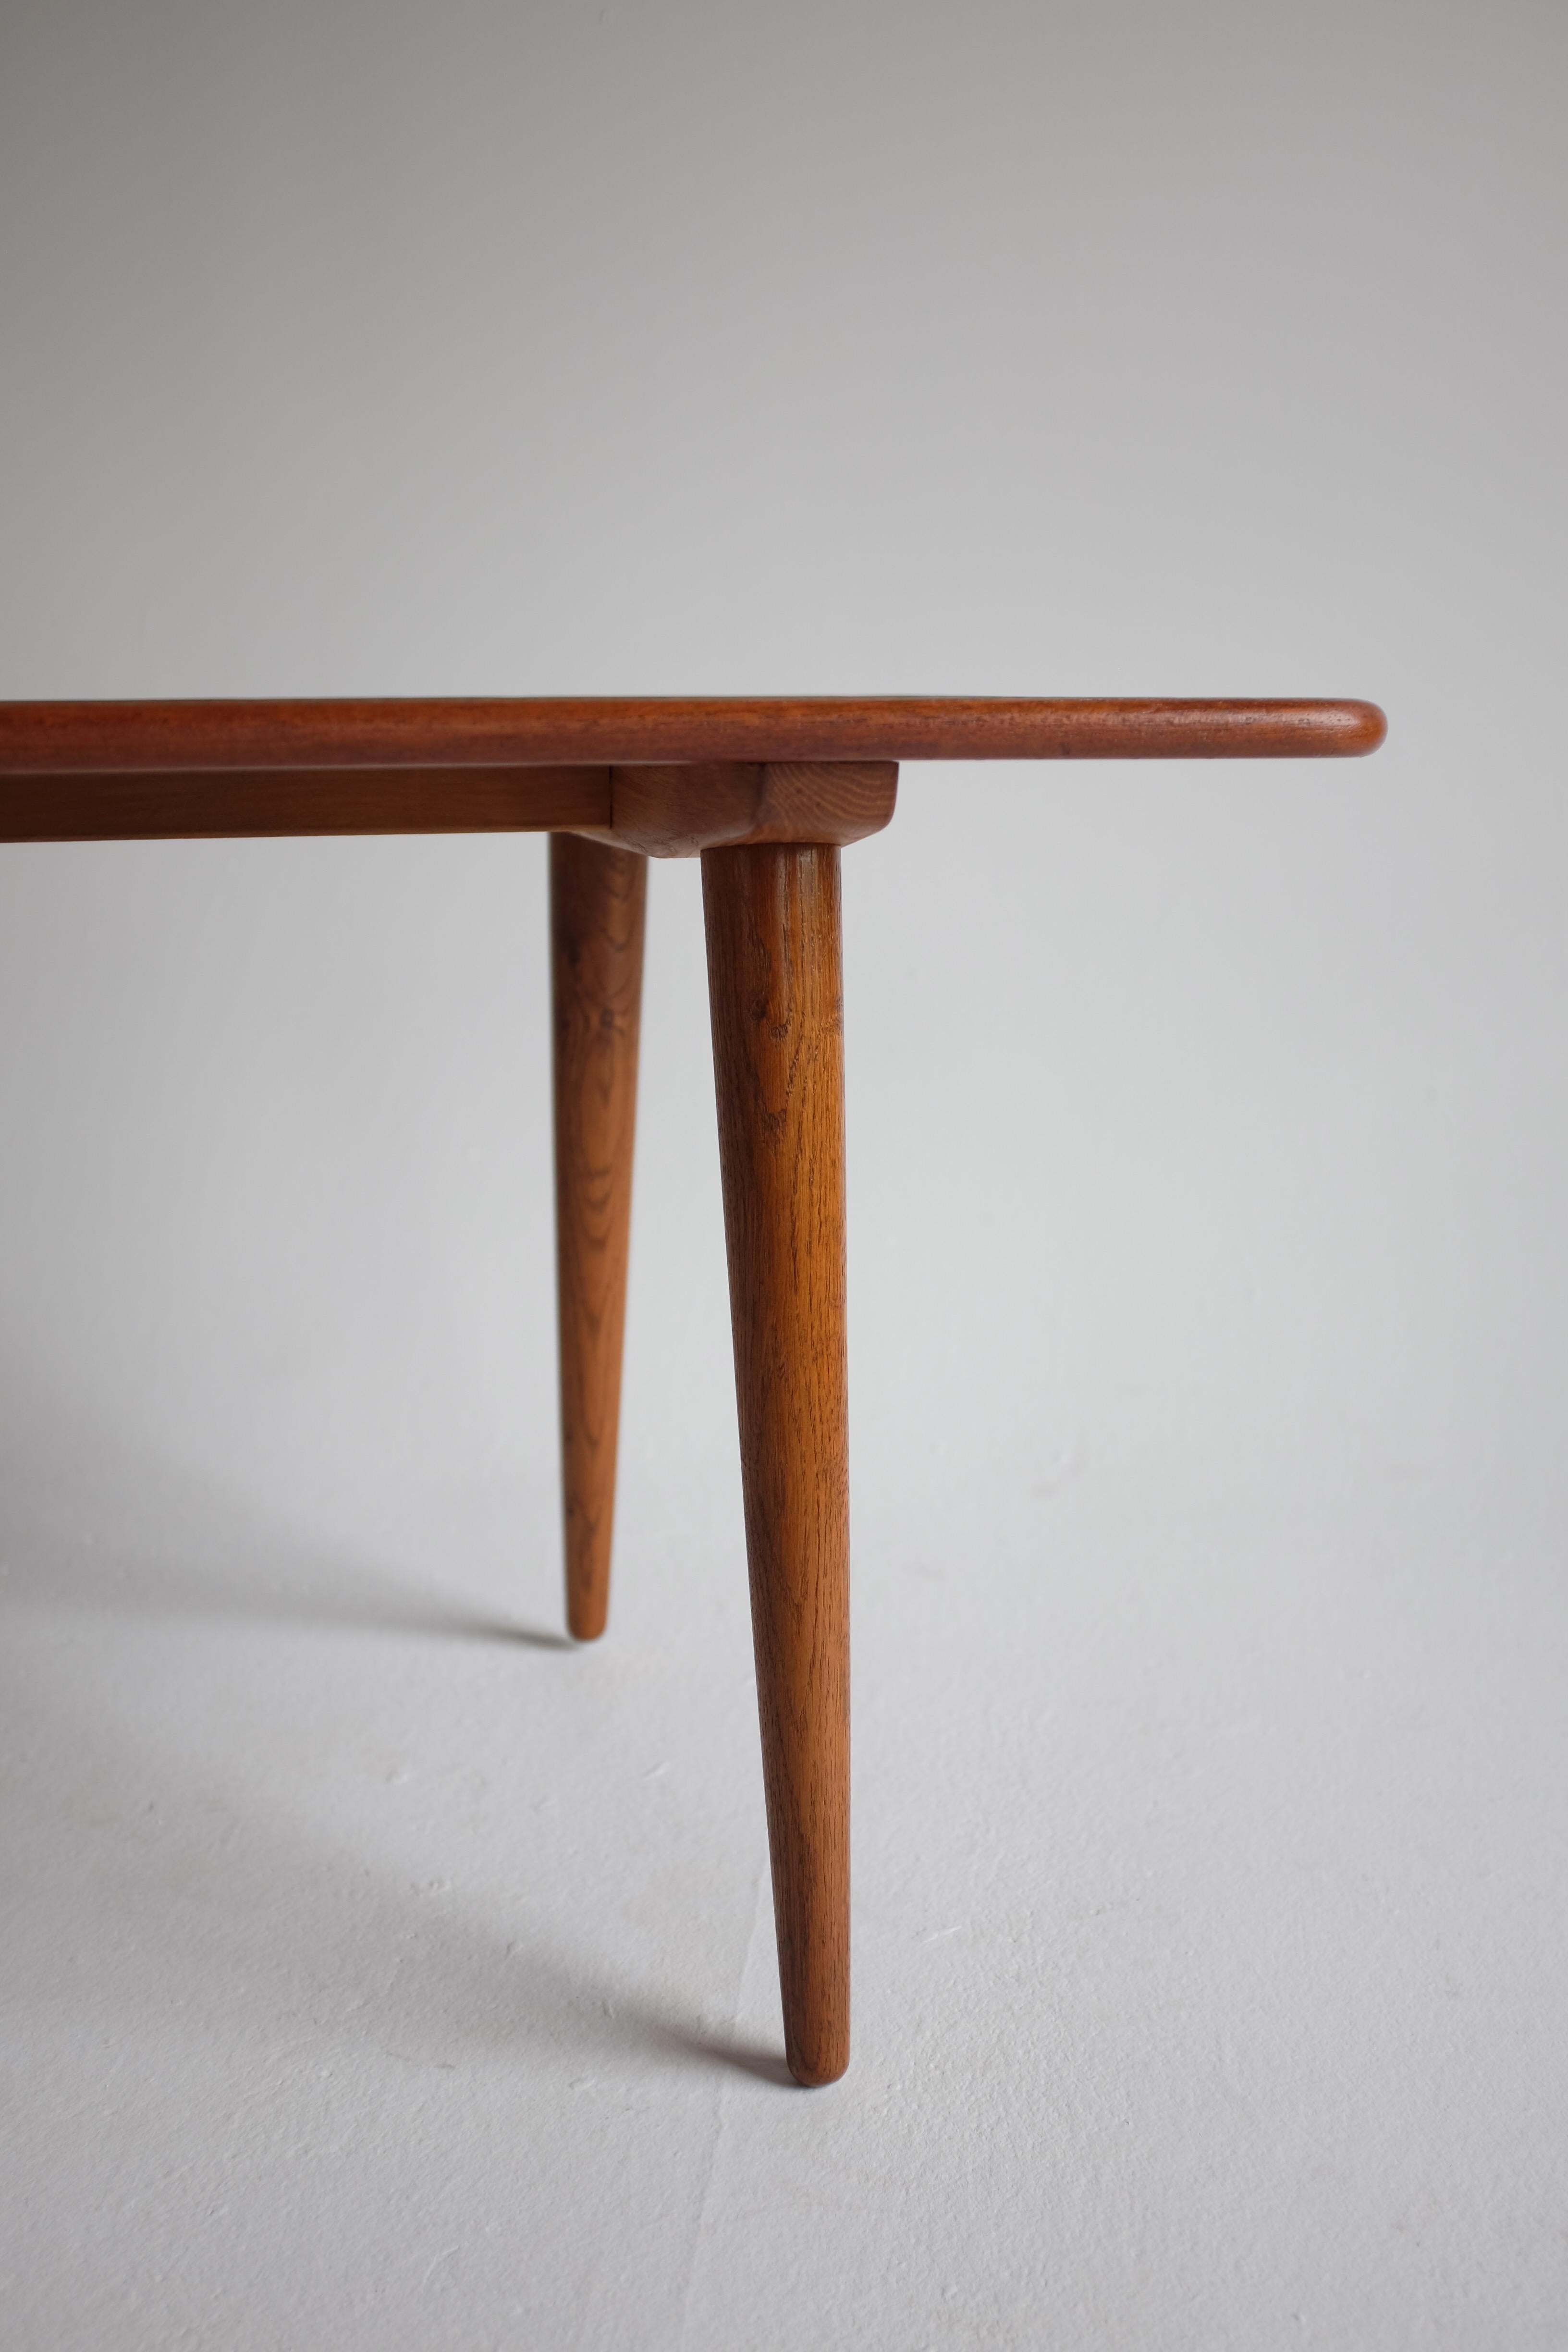 Iconic Coffee Table T-11 by Hans Wegner for Andreas Tuck, Denmark. This piece has a teak top with oak legs and marked underneath. Designed in 1954 and manufactured during the 1950s this is a classic Hans Wegner design with simple and elegant